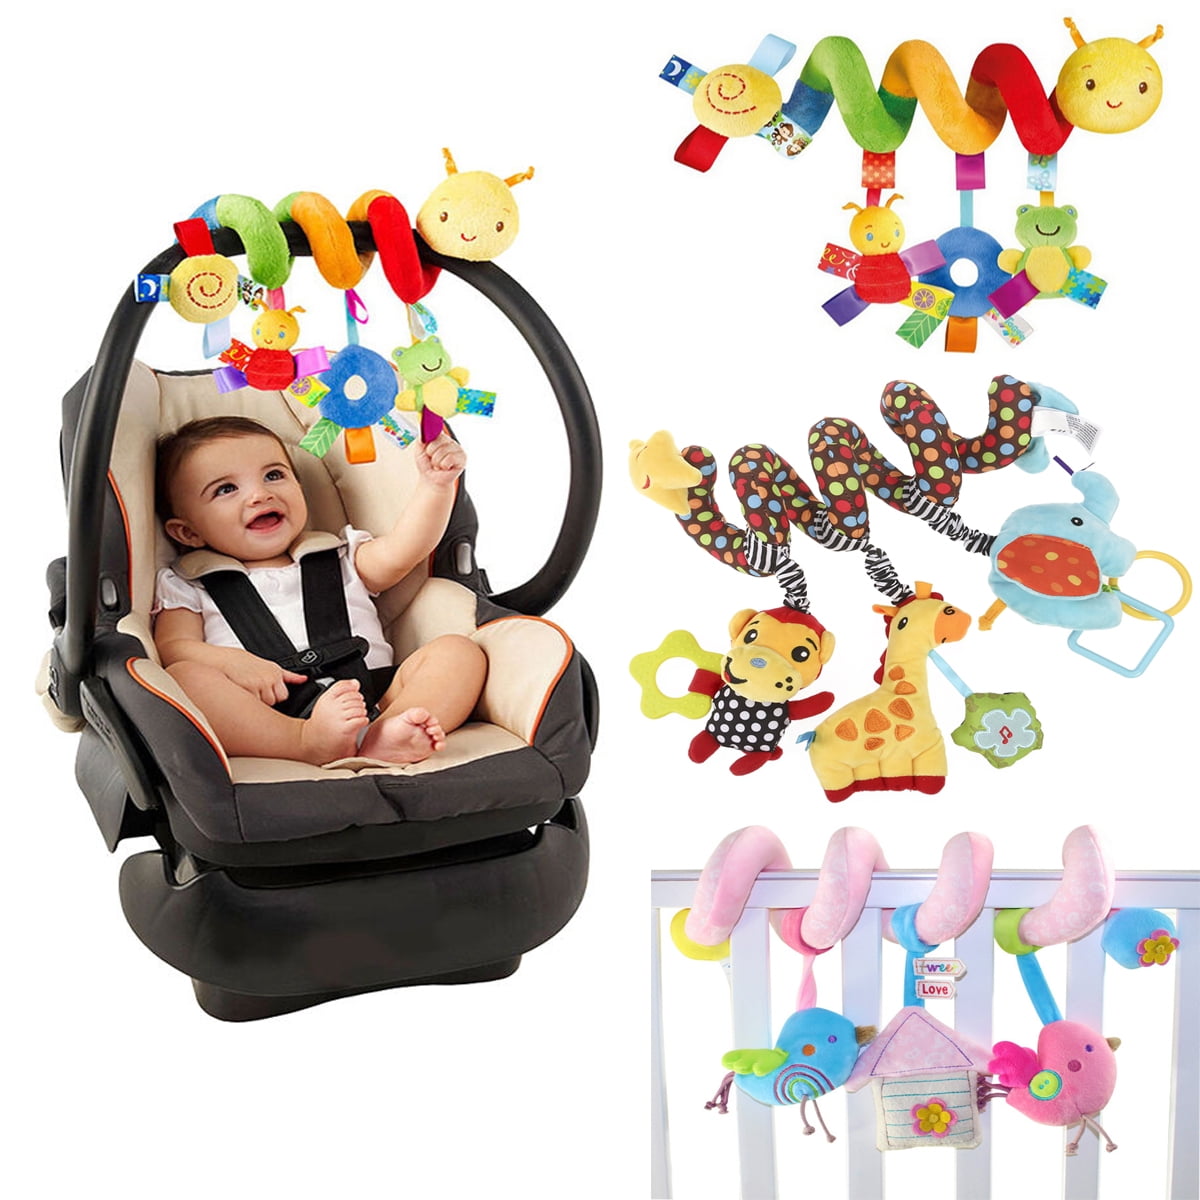 Baby cot toys